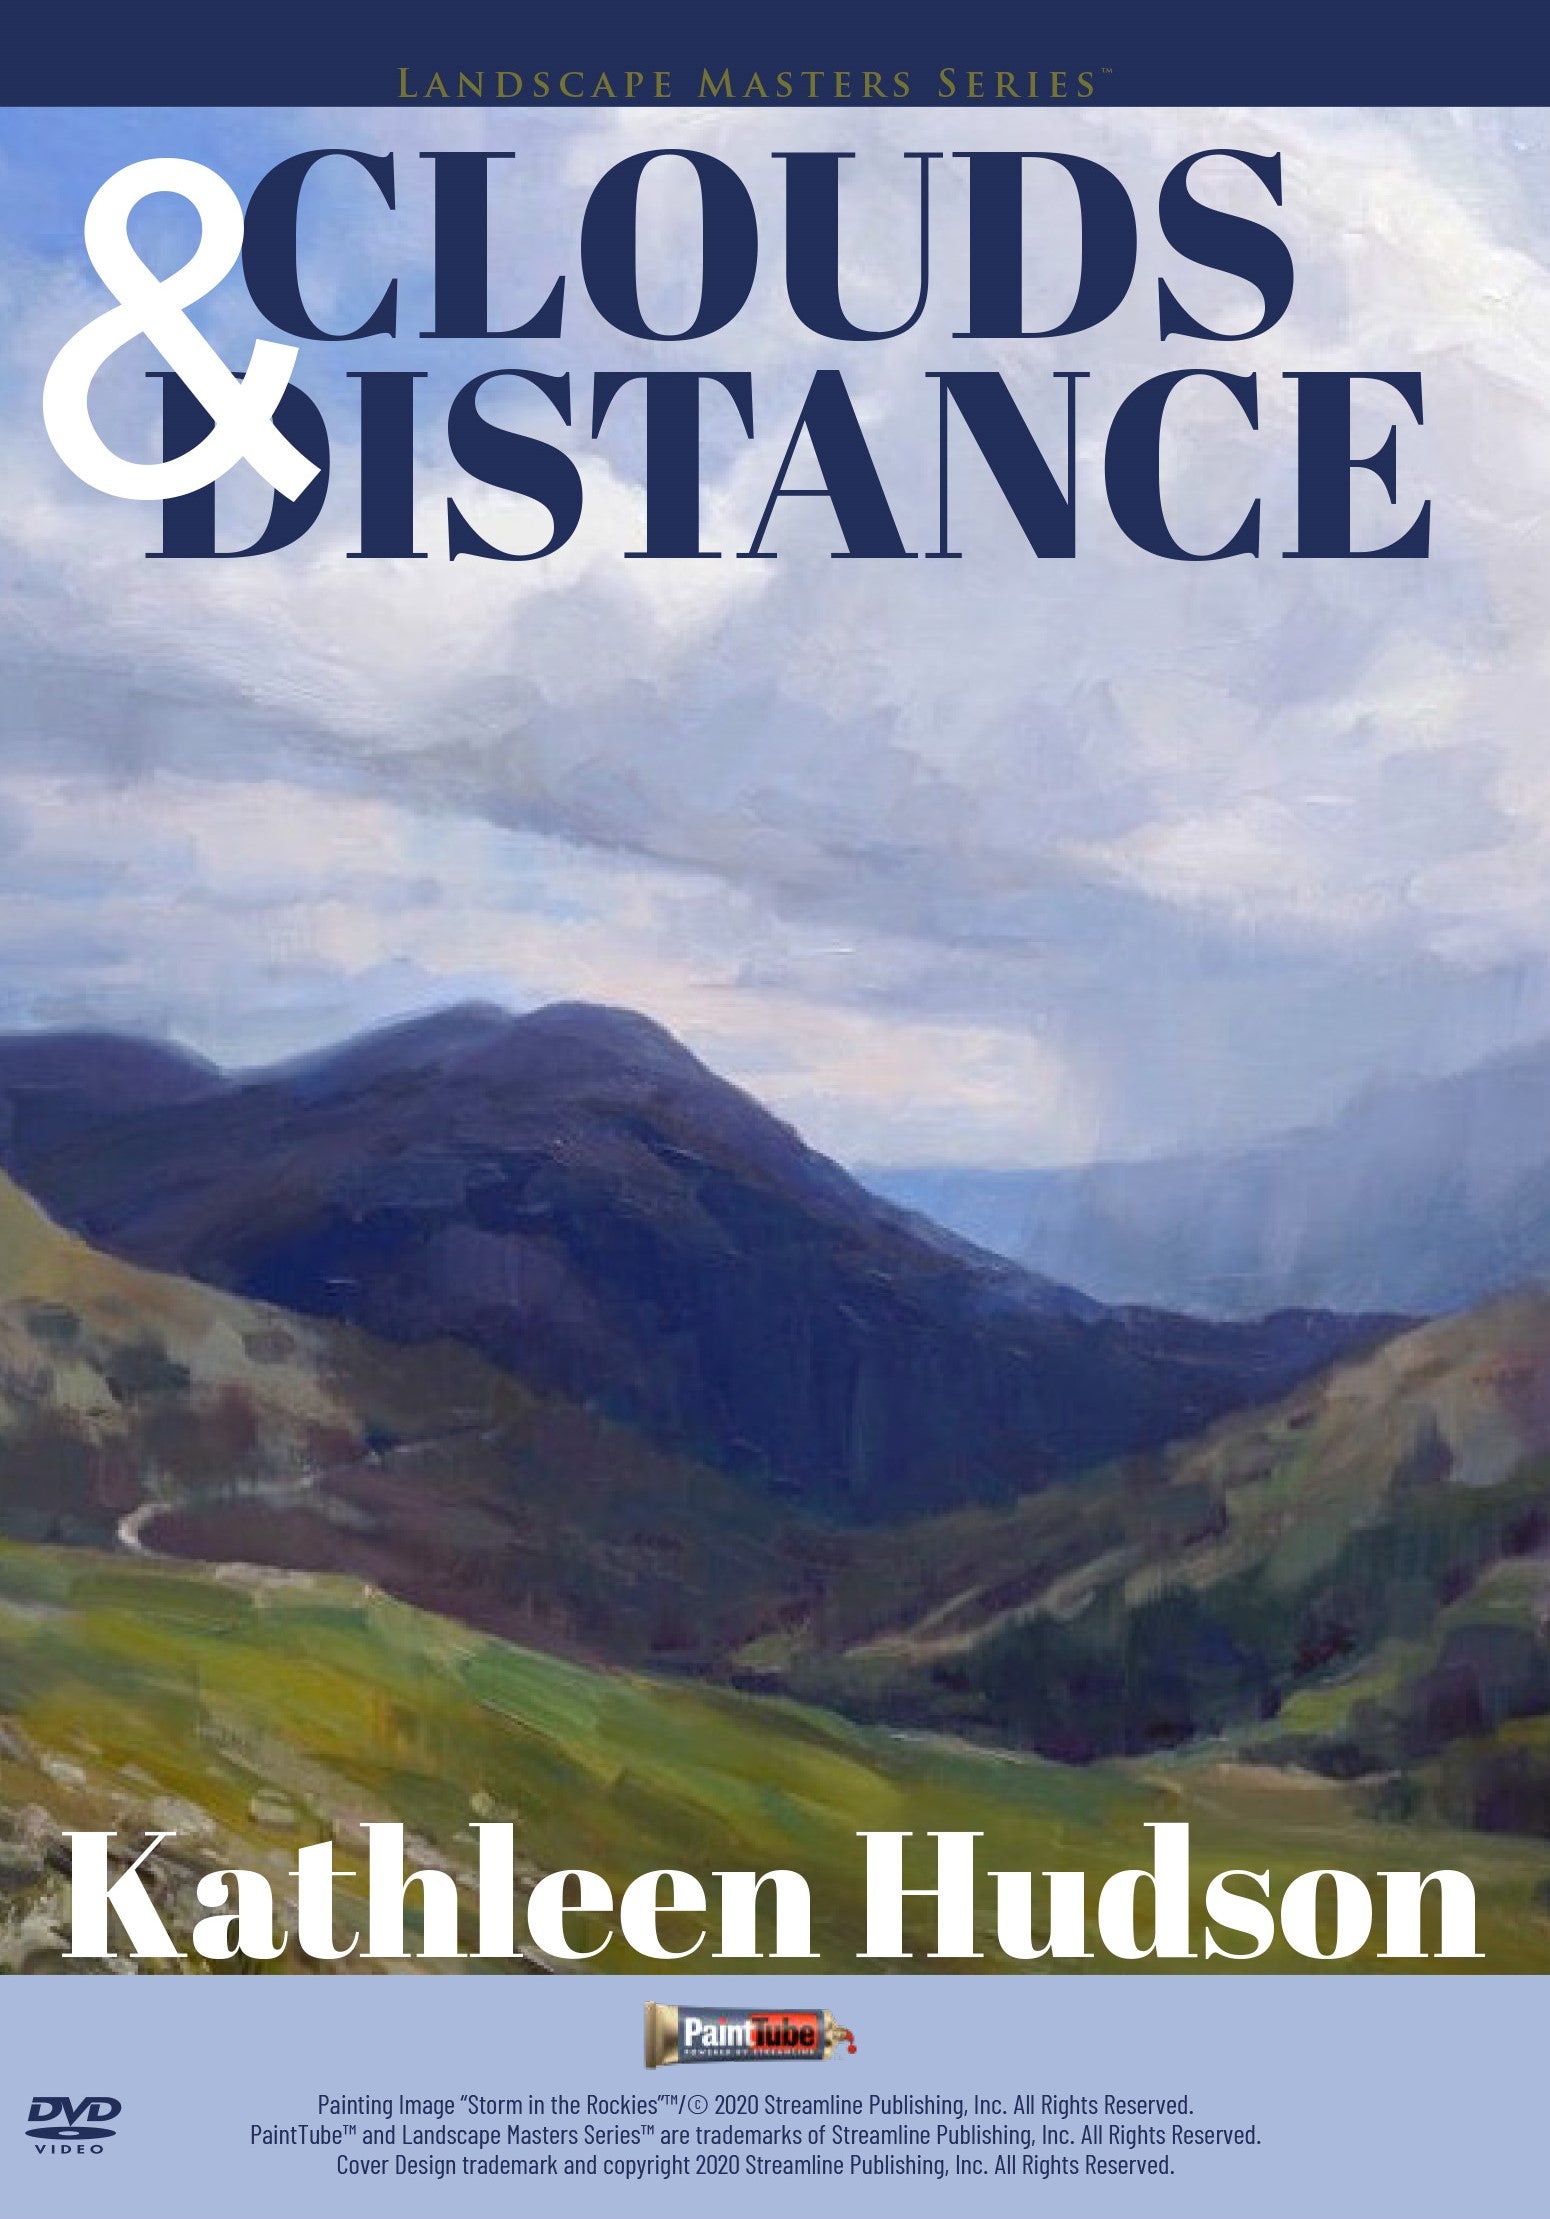 Kathleen Hudson: Clouds and Distance